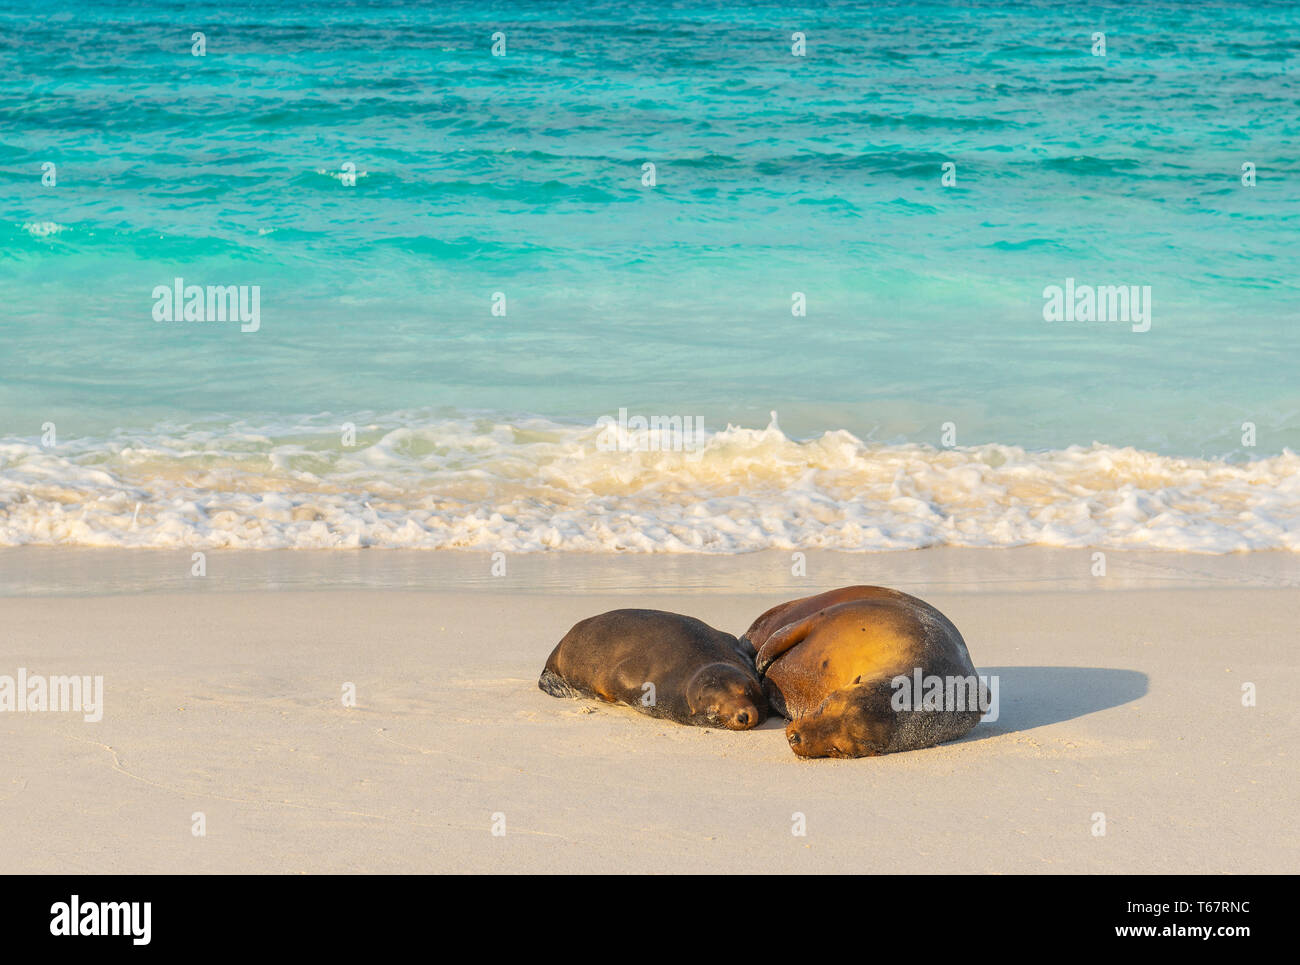 Galapagos Sea Lions and the turquoise Pacific Ocean waters on the beach of Gardner Bay, Espanola Island, Galapagos national park, Ecuador. Stock Photo